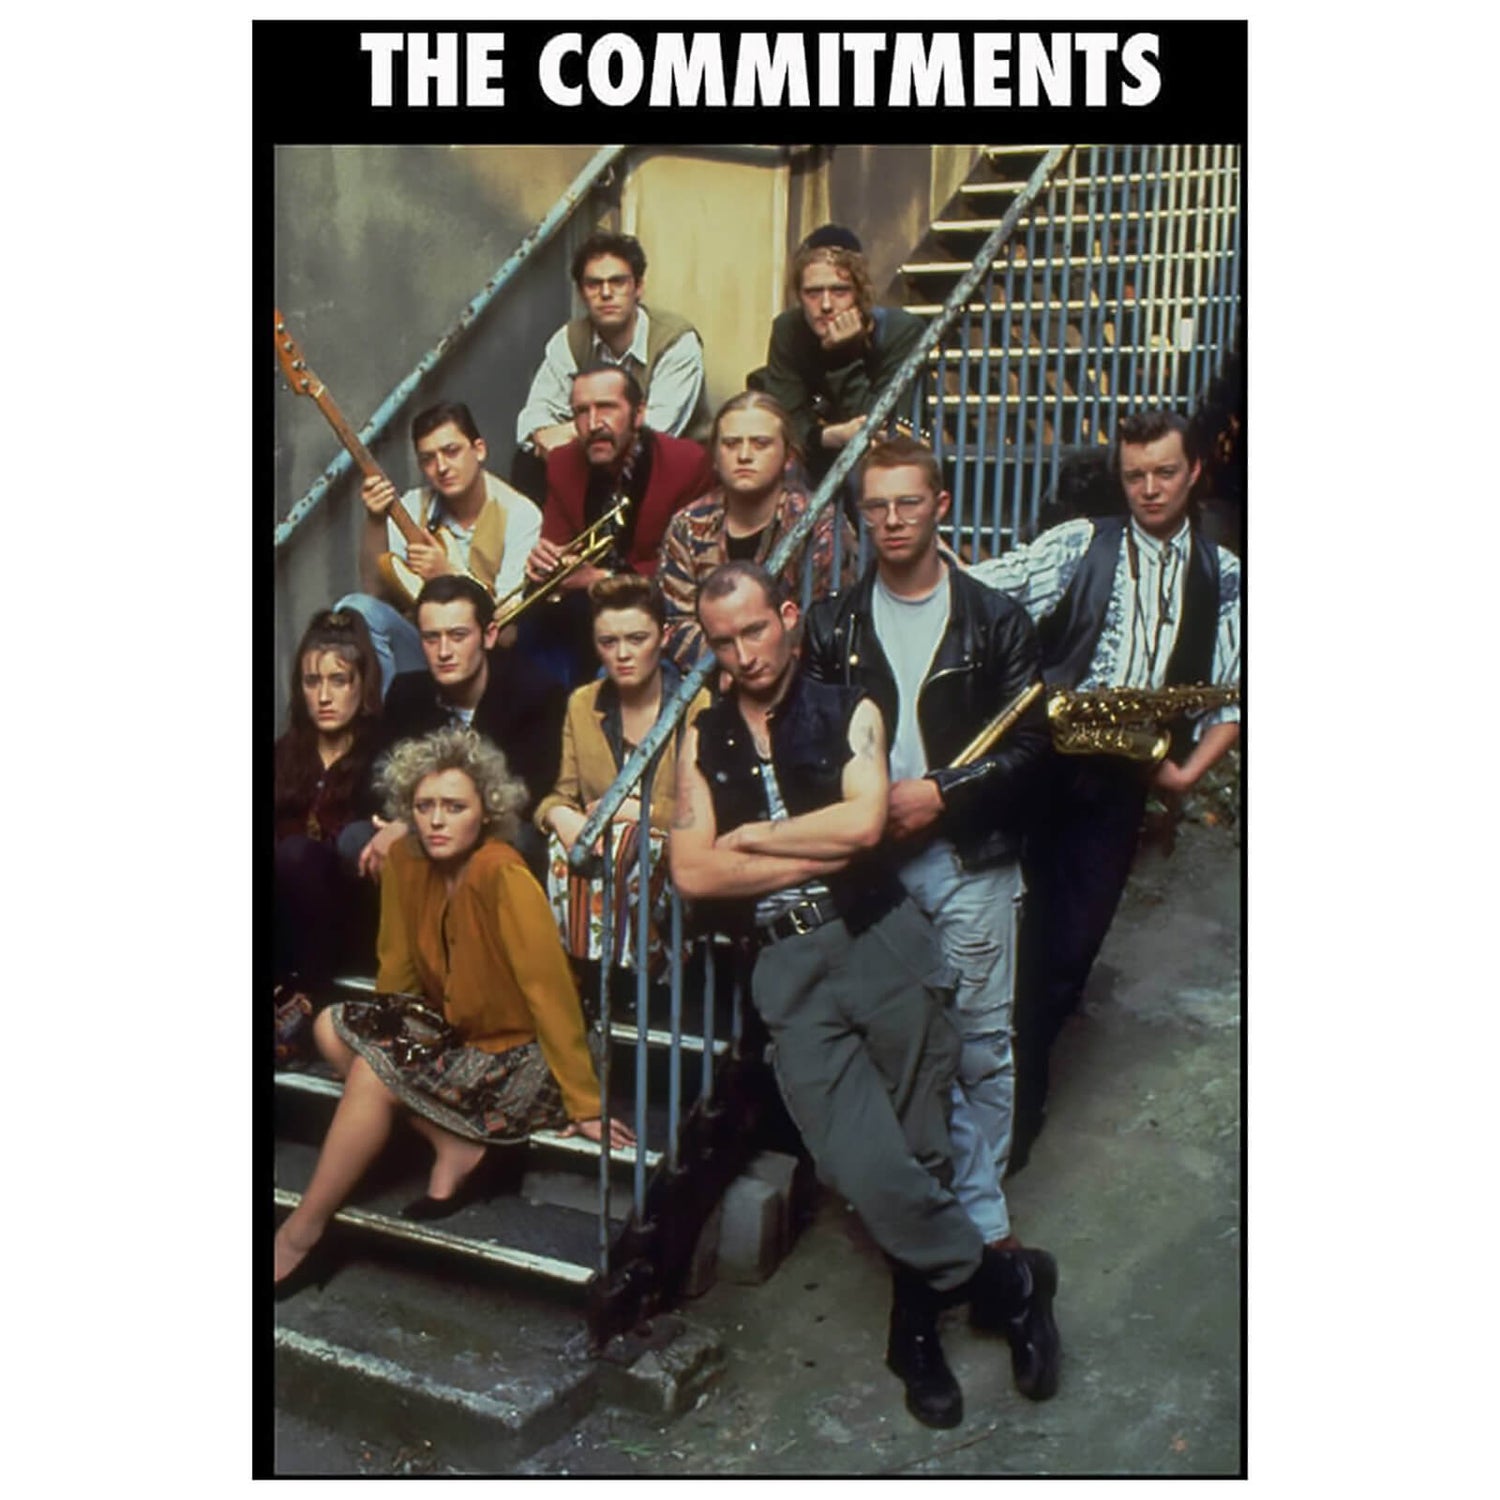 The Commitments 25. Jahrestag